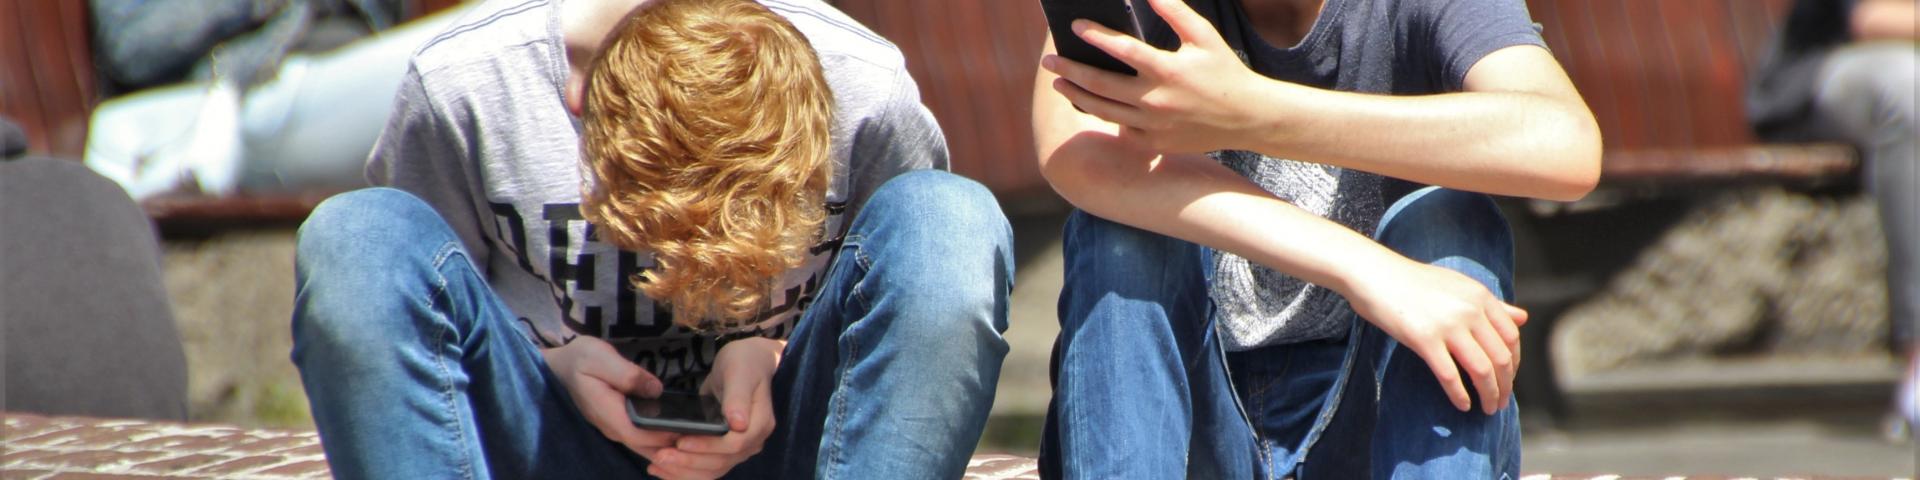 teens on cell phone